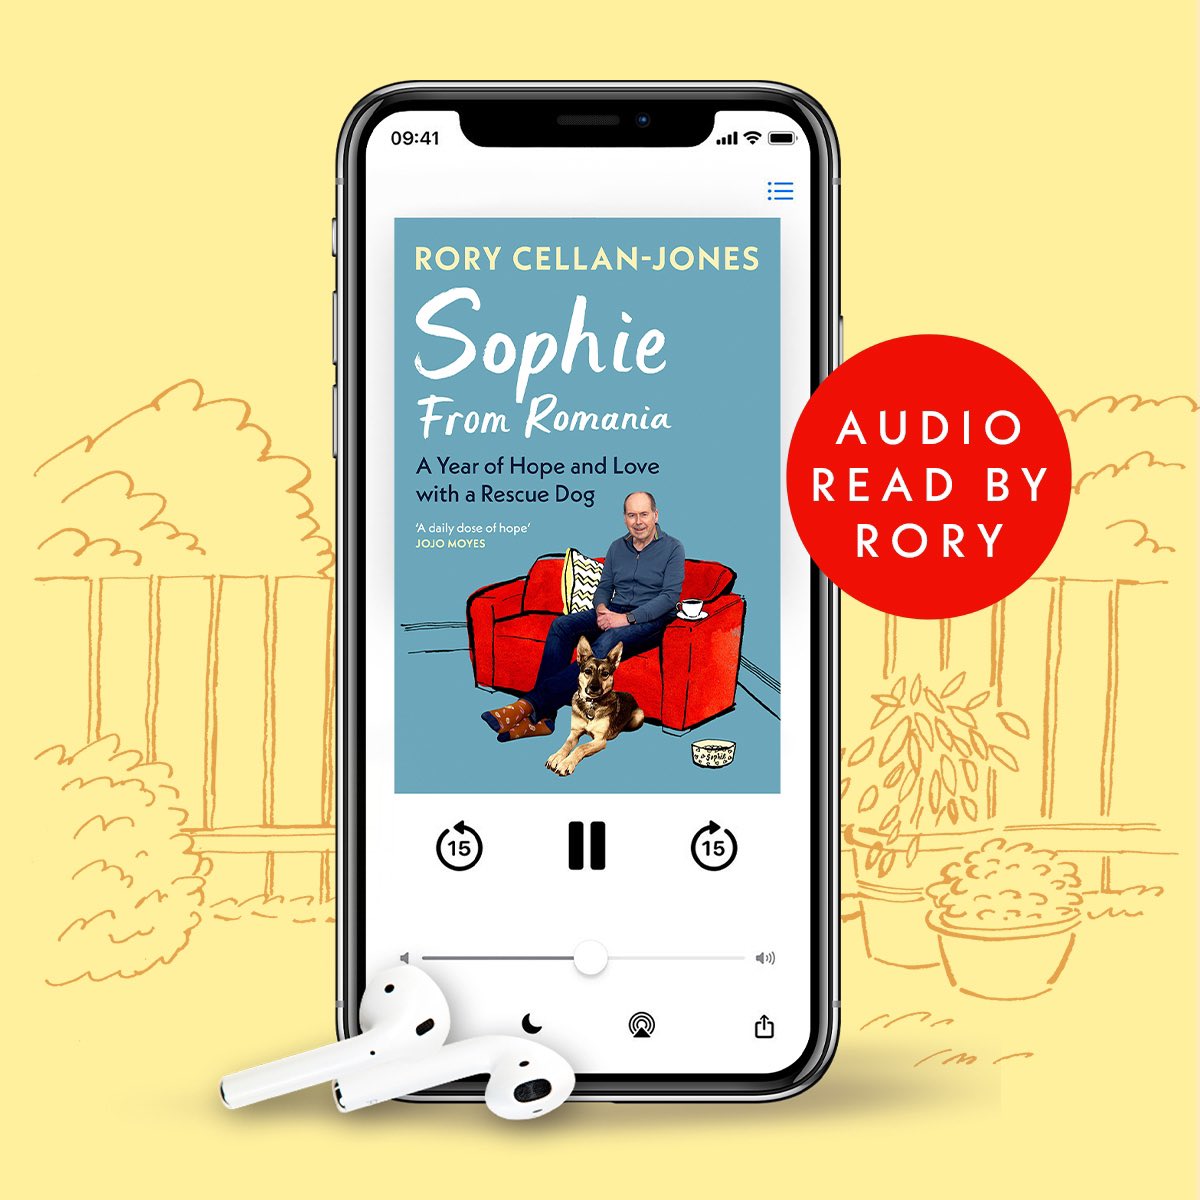 A reminder that my book about #sophiefromromania is coming in October - and if audiobooks are your thing you’ll be able to listen to me reading it!